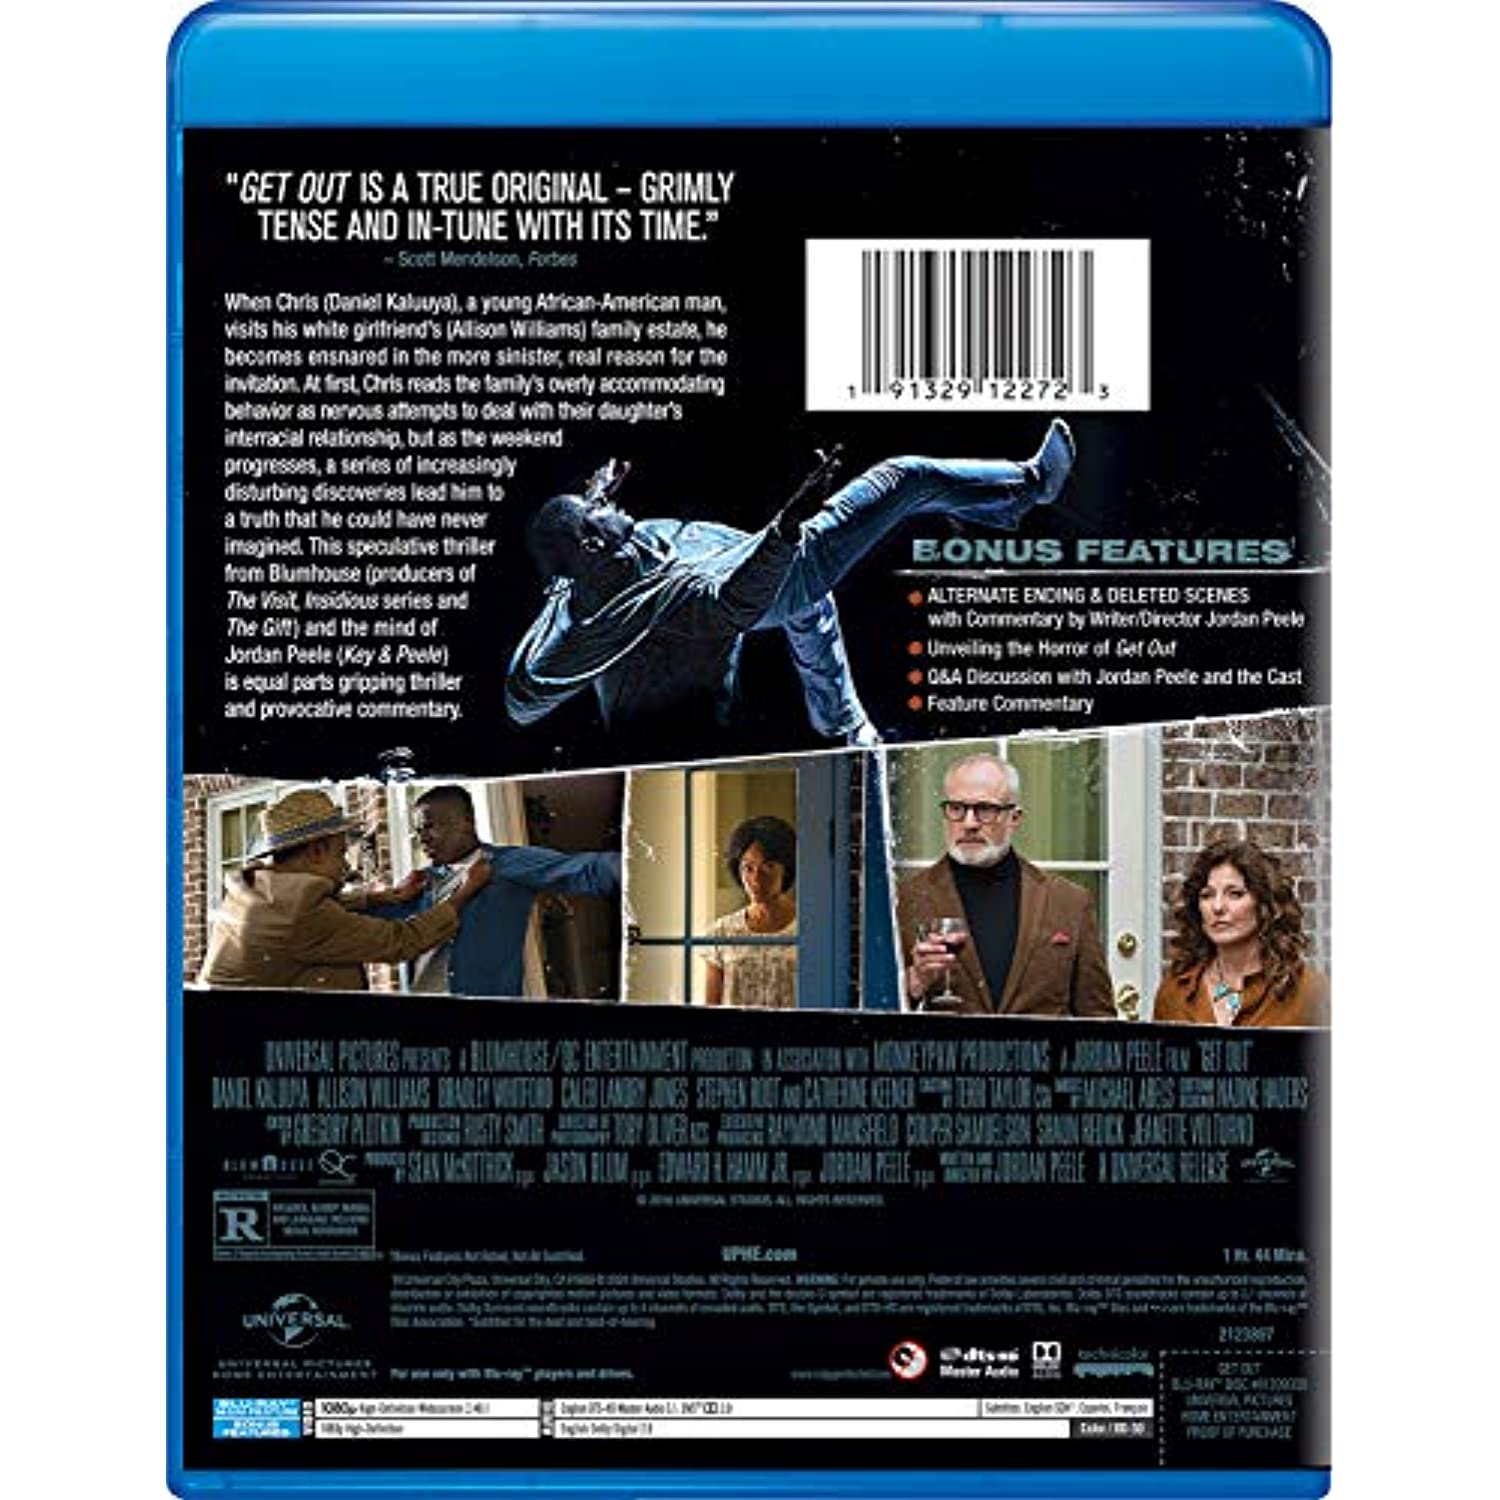 Get Out (Blu-ray), Universal Studios, Horror - image 2 of 2